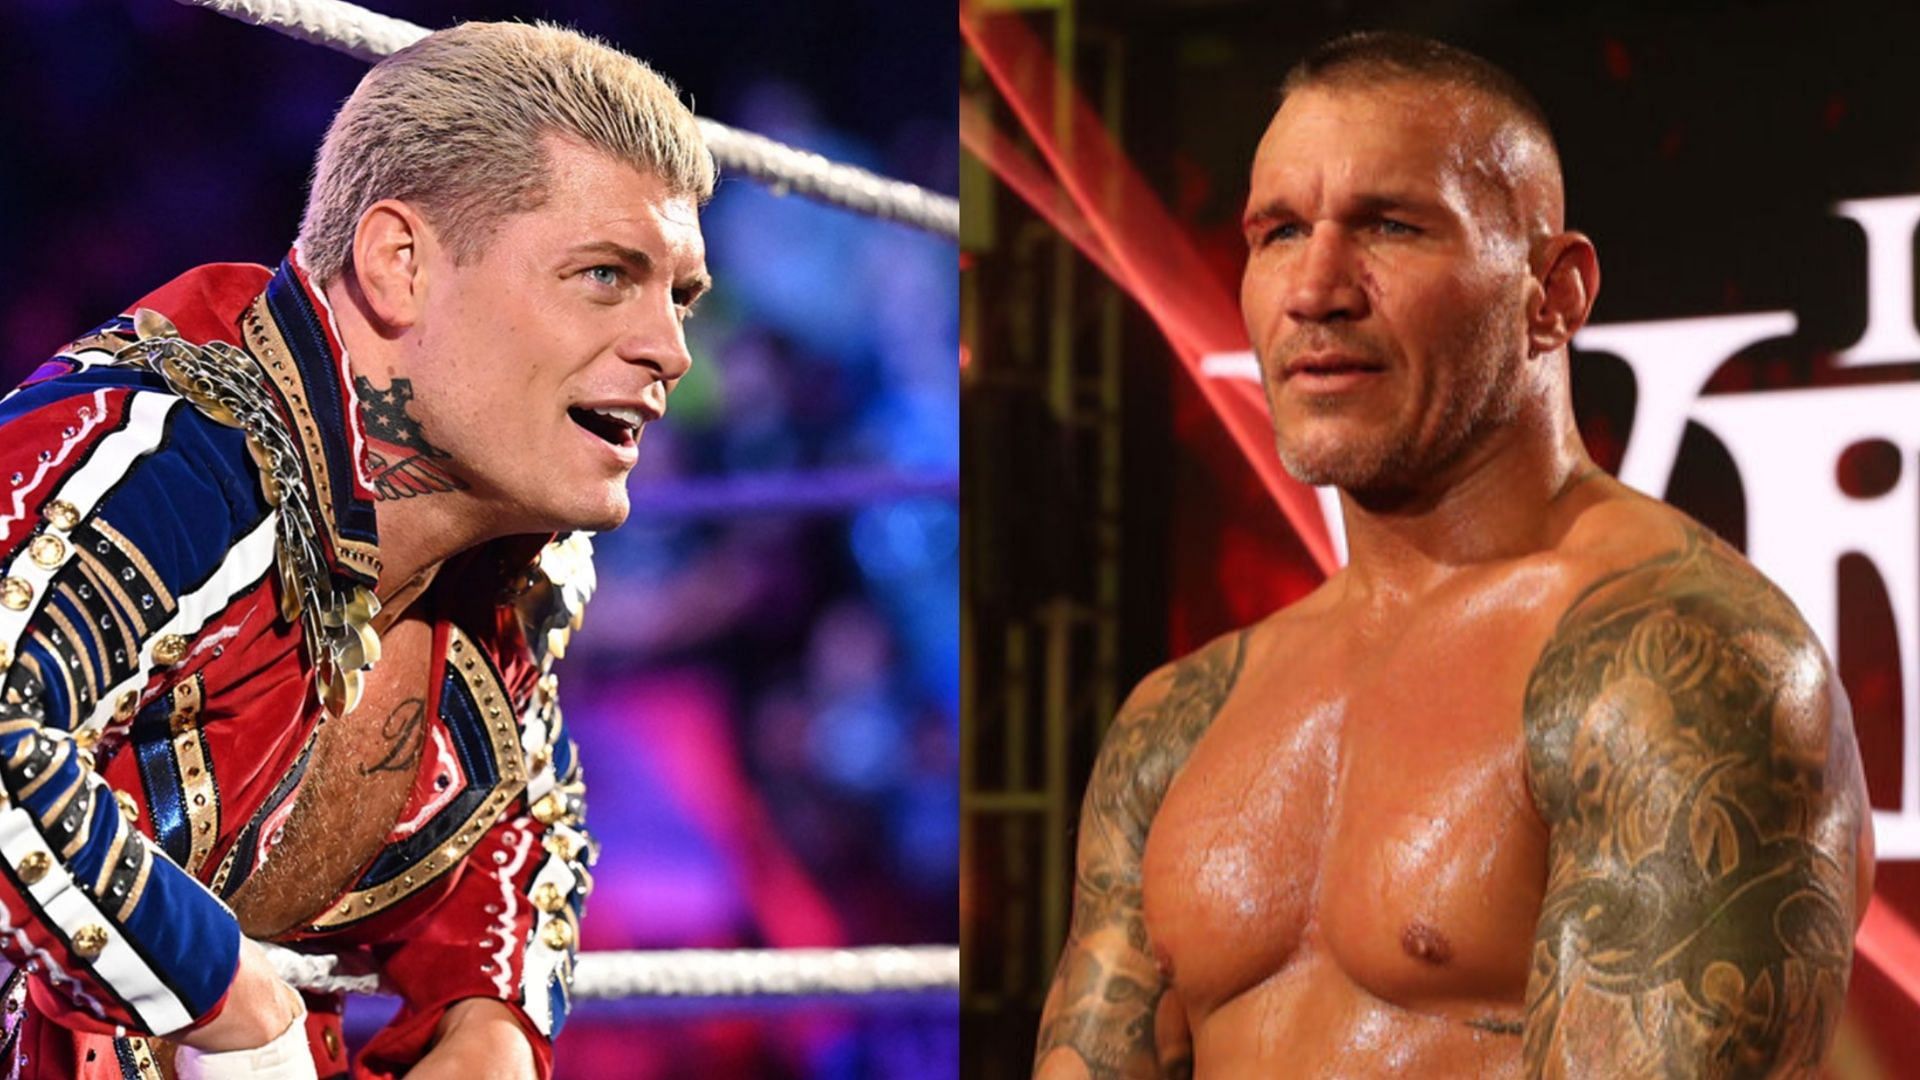 Cody Rhodes once shared that he aspired to be like Randy Orton.